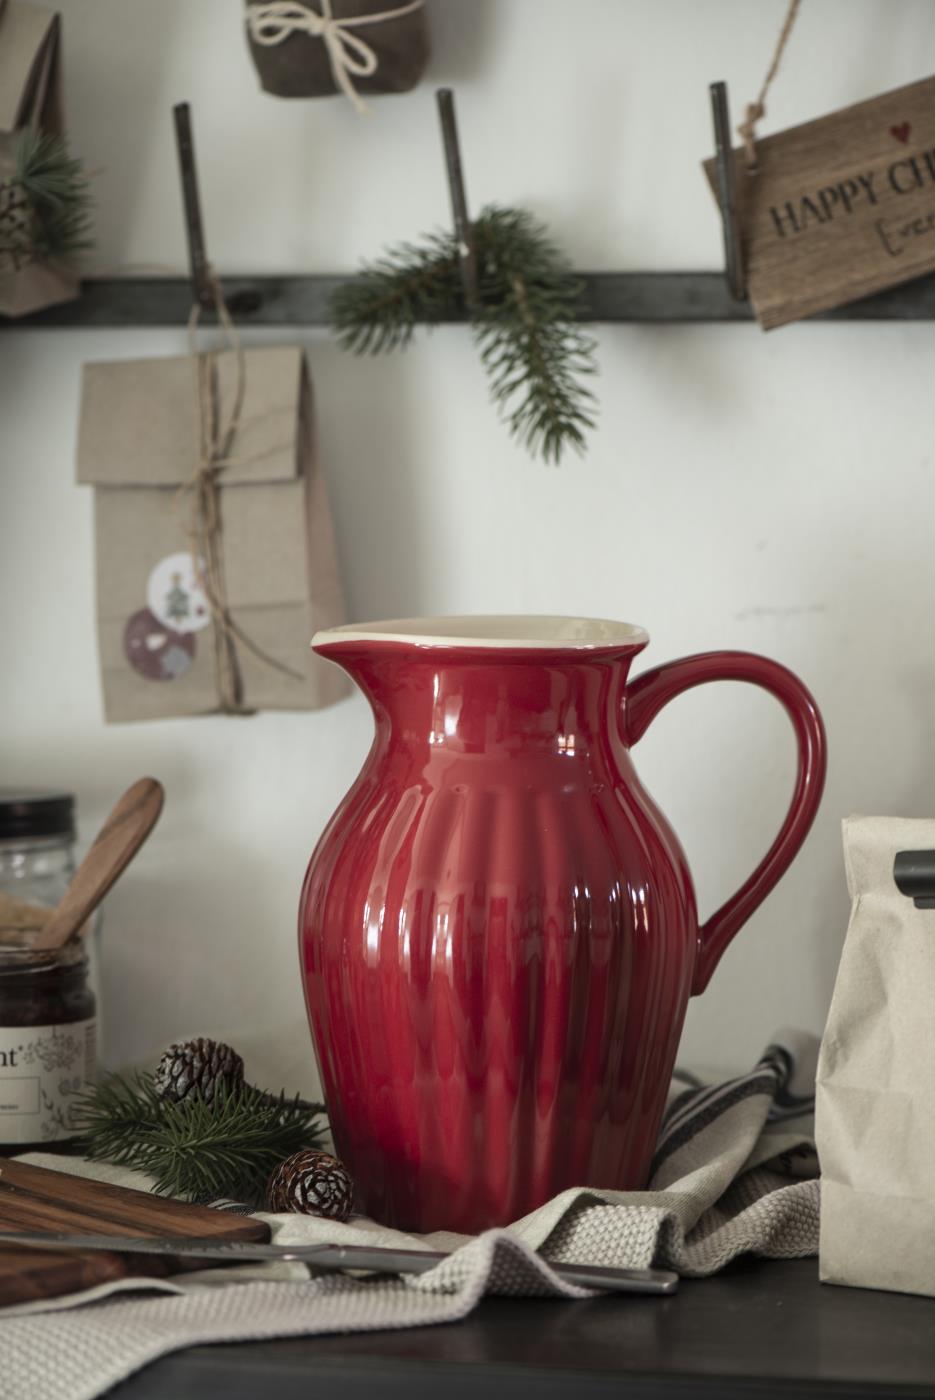 ribbed red jug with white interior